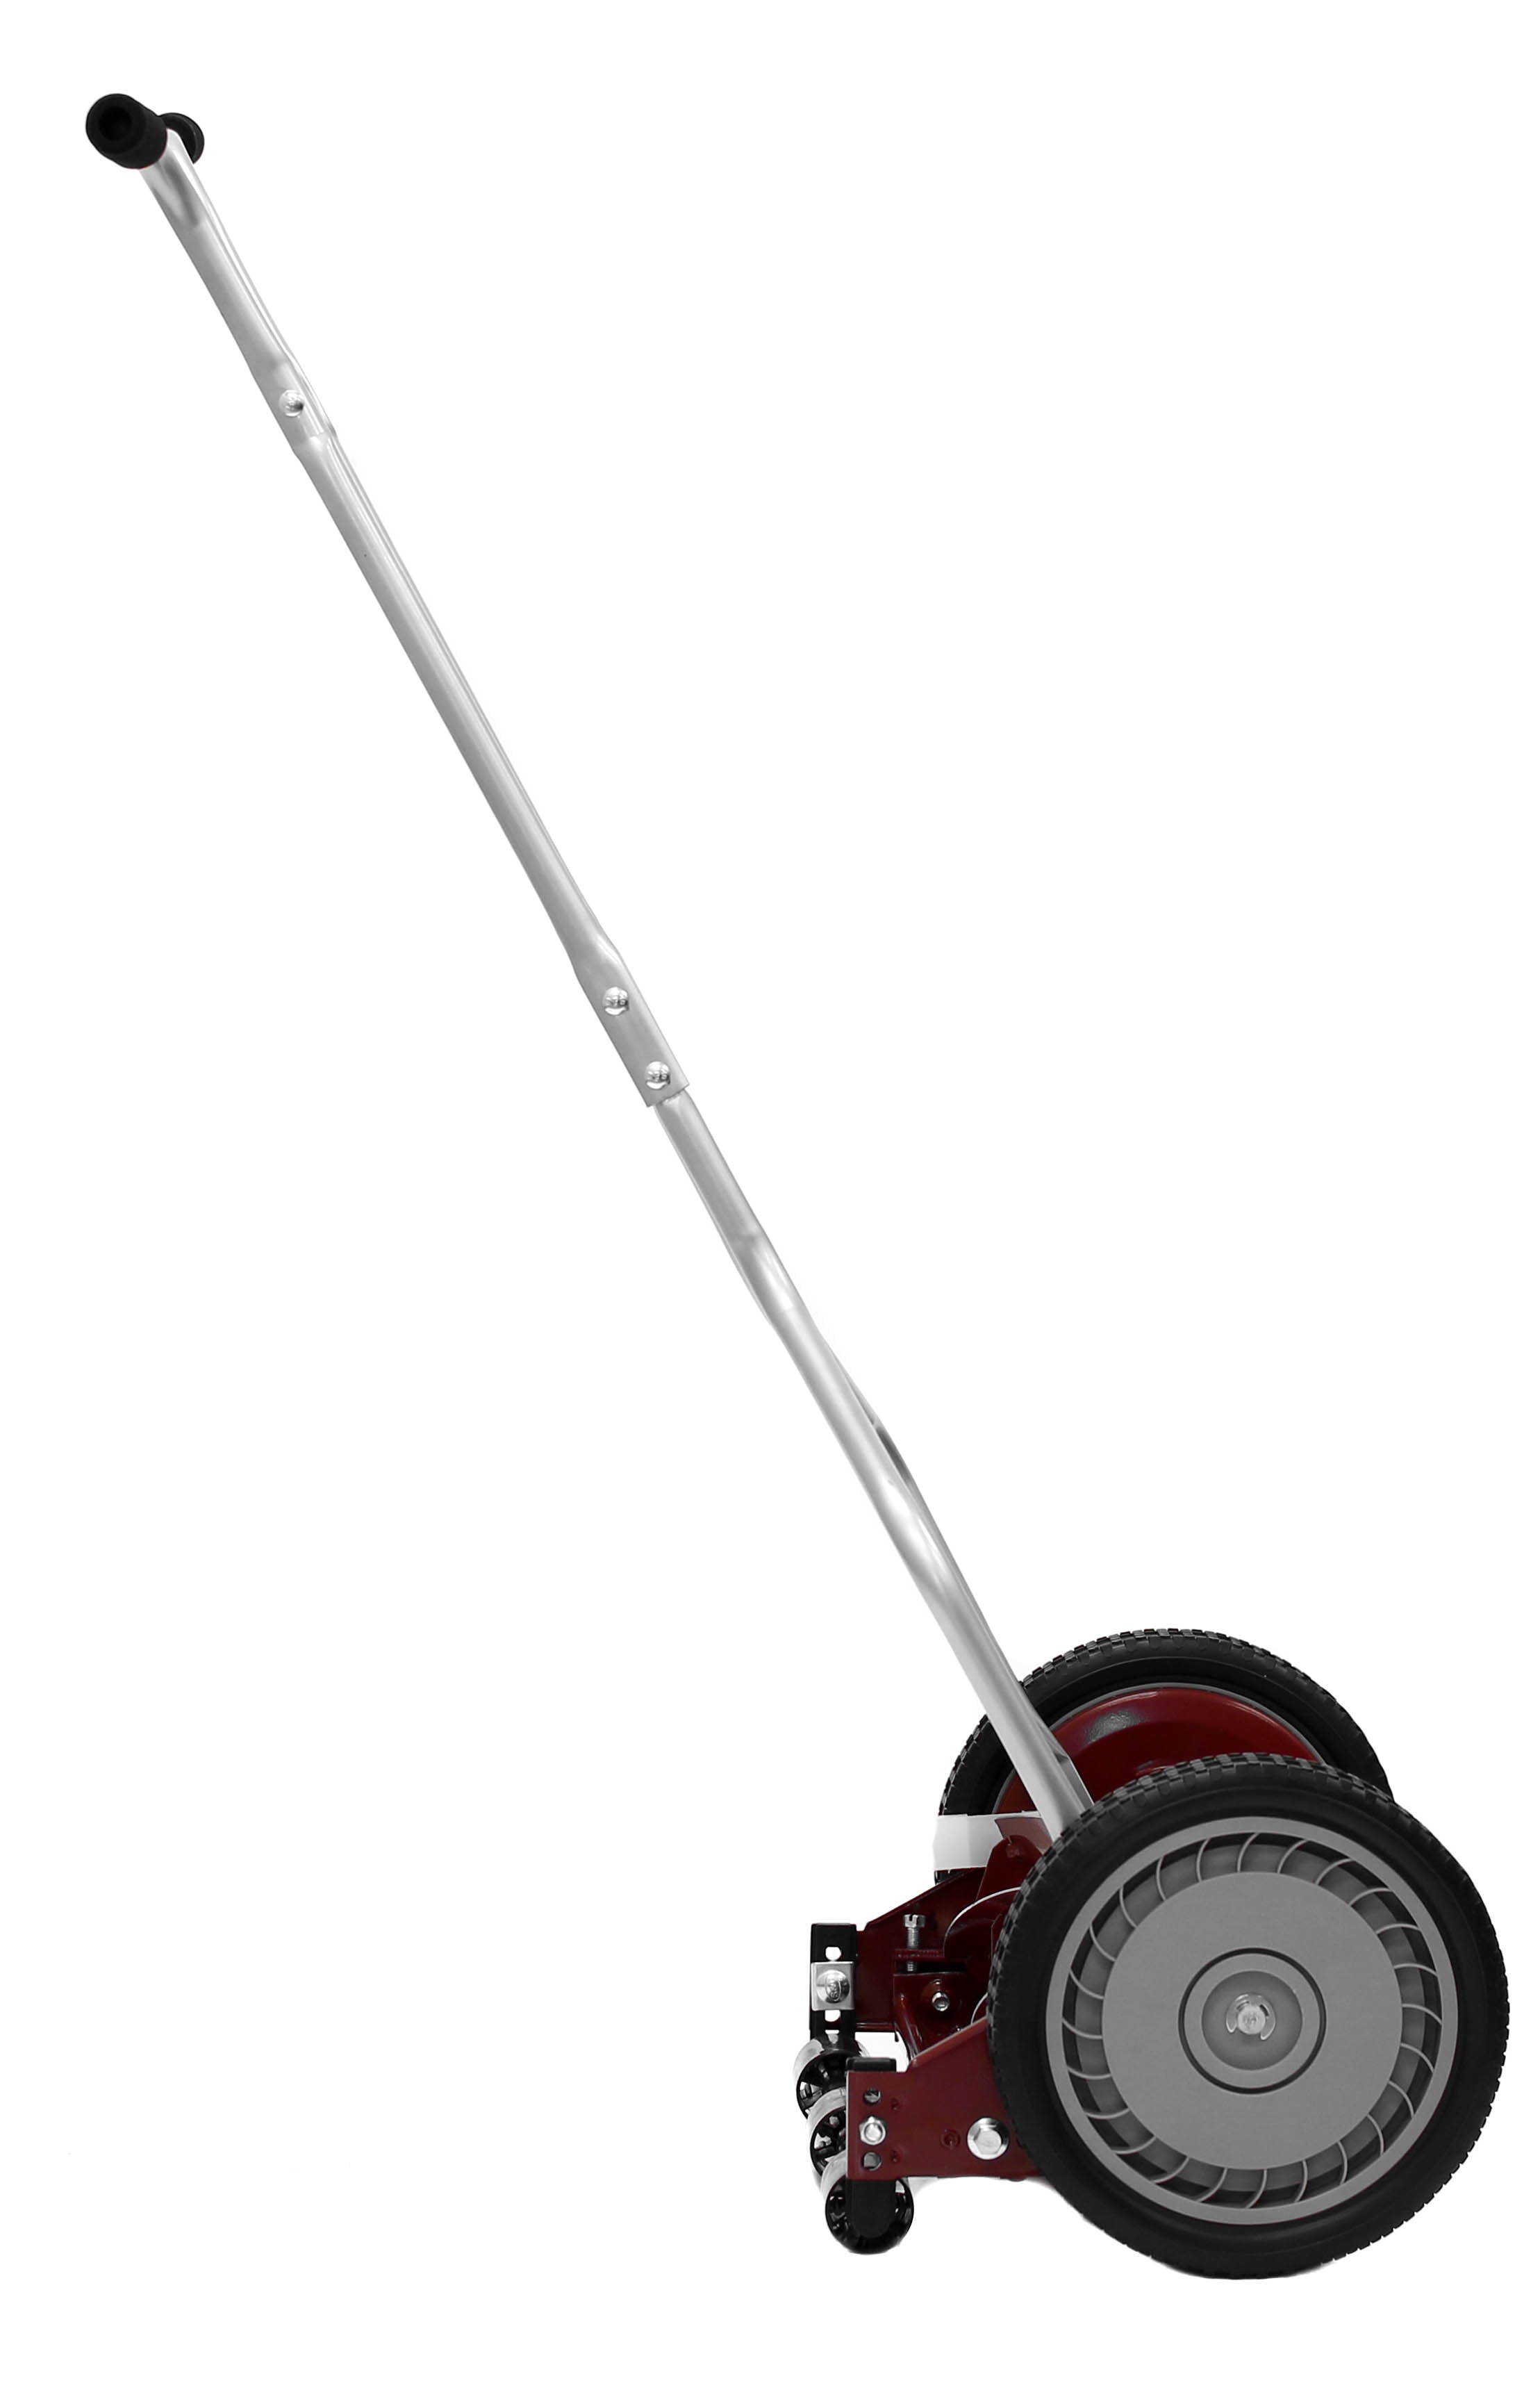 1304-14GC 14 Inches 5-Blade Push Reel Lawn Mower with Grass Catcher - Mint  Color